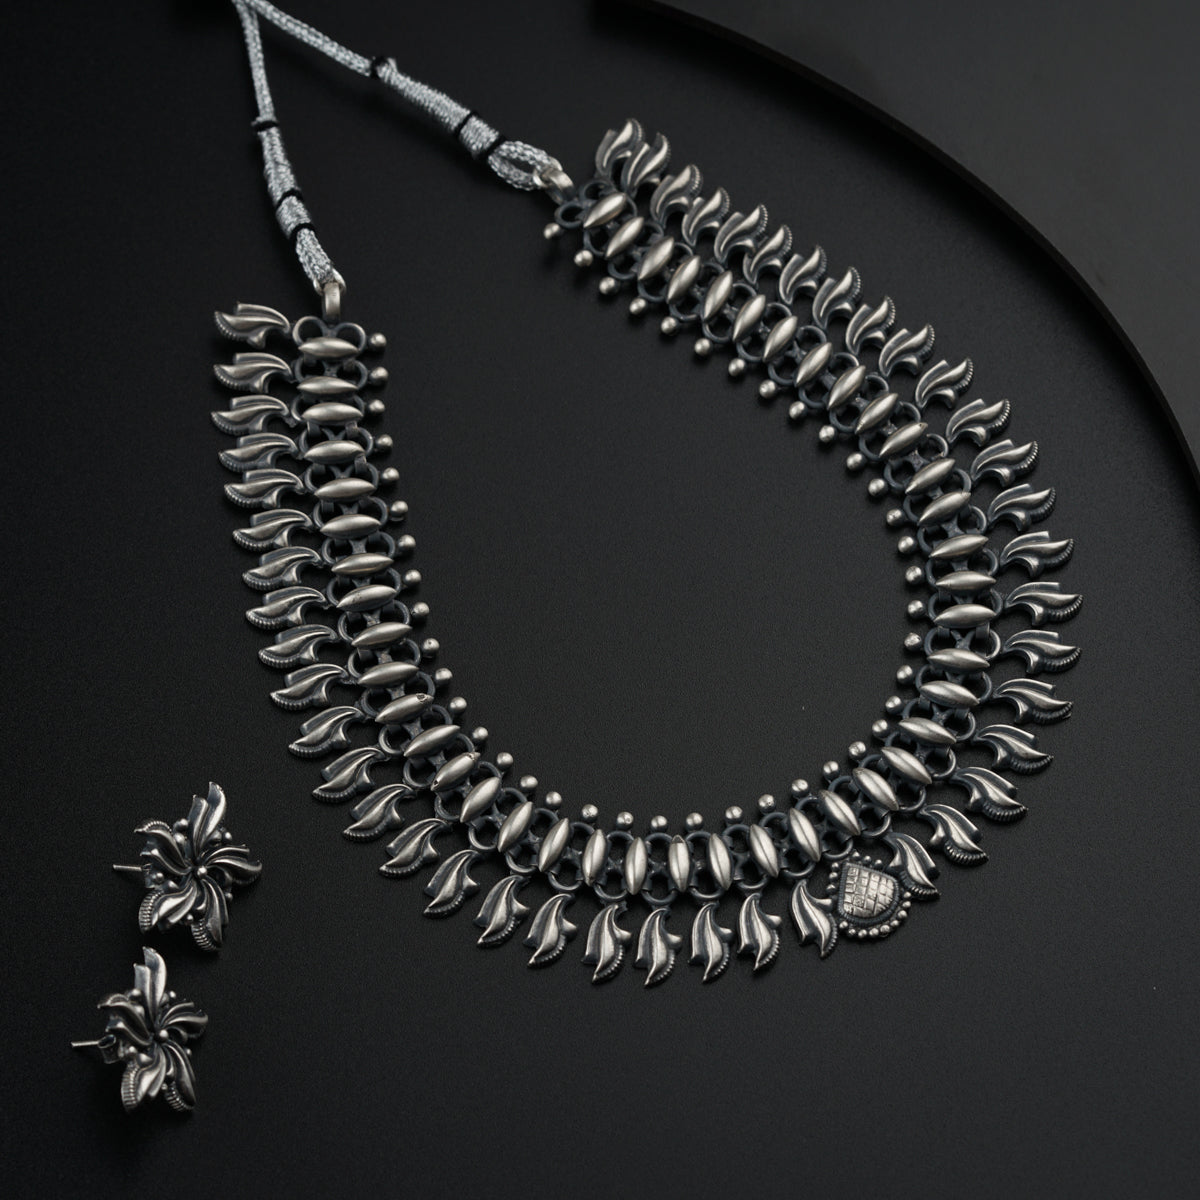 a silver necklace and earring on a black surface